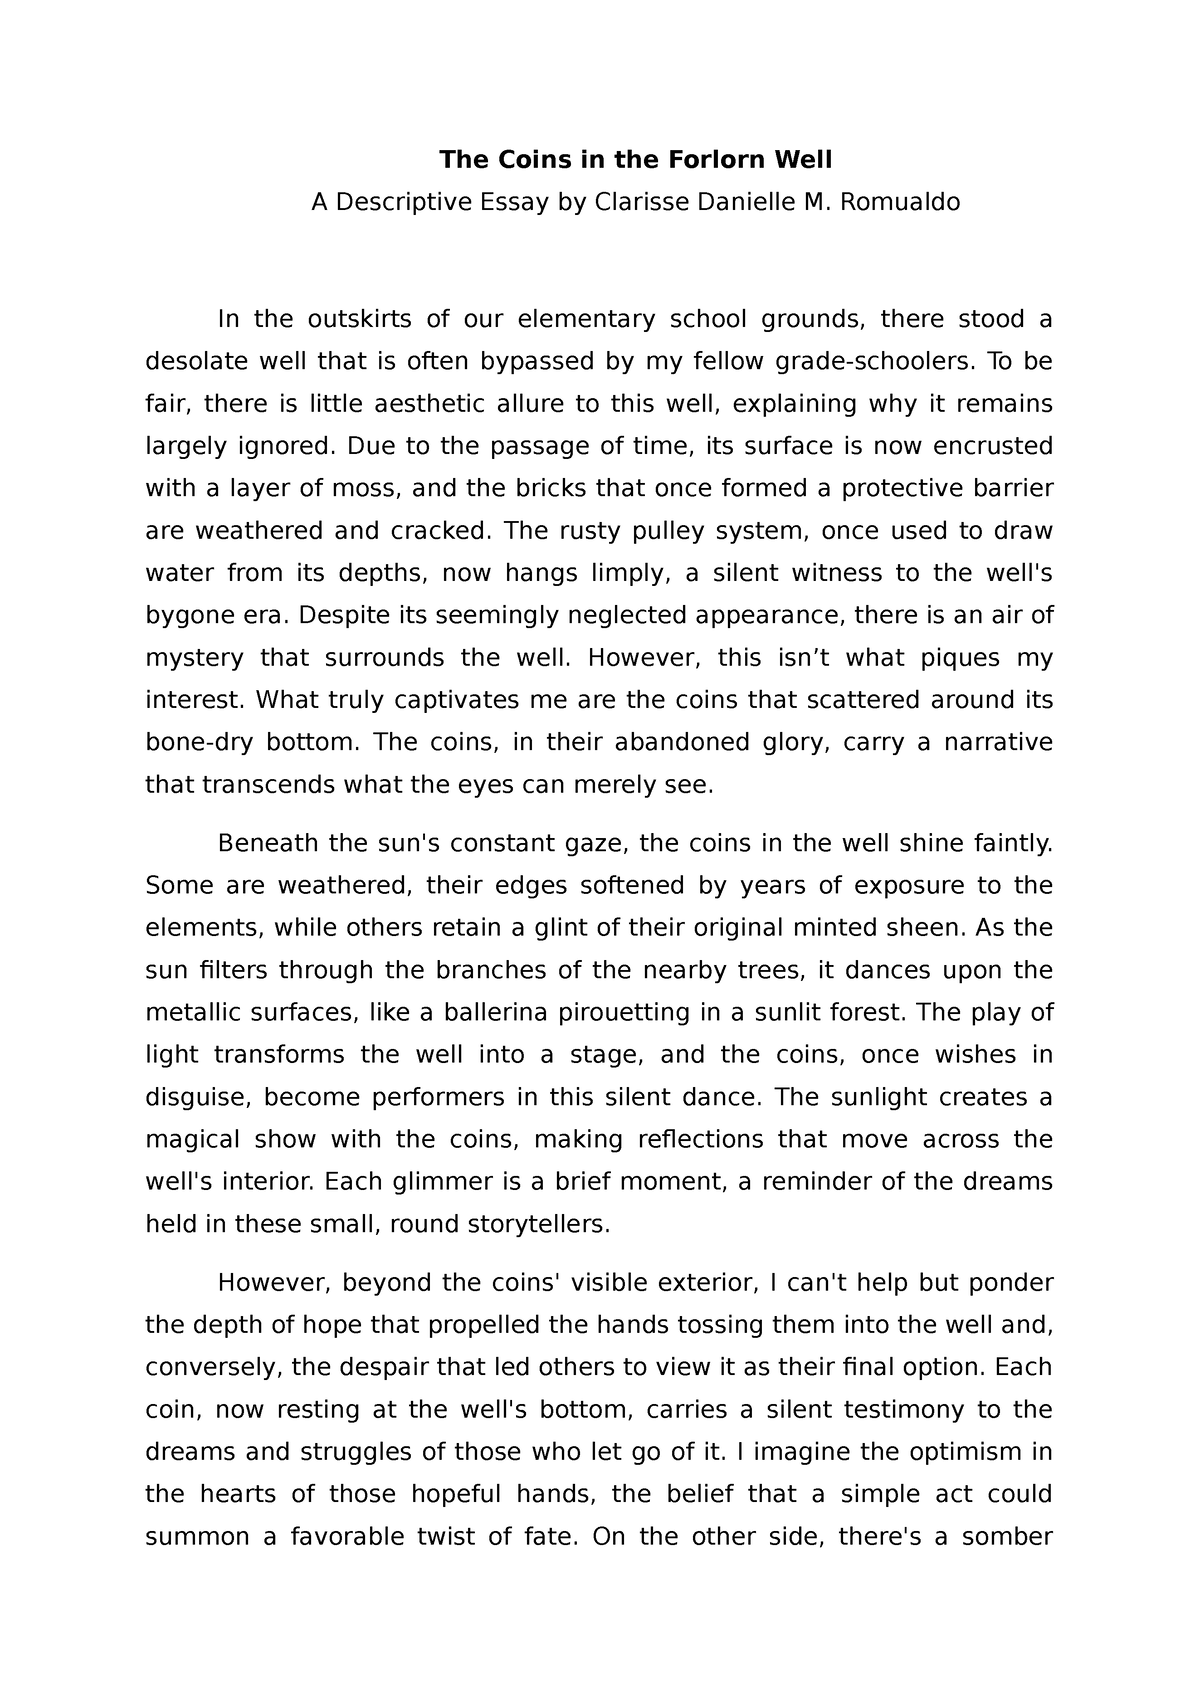 Descriptive essay - Romualdo In the outskirts of our elementary school ...